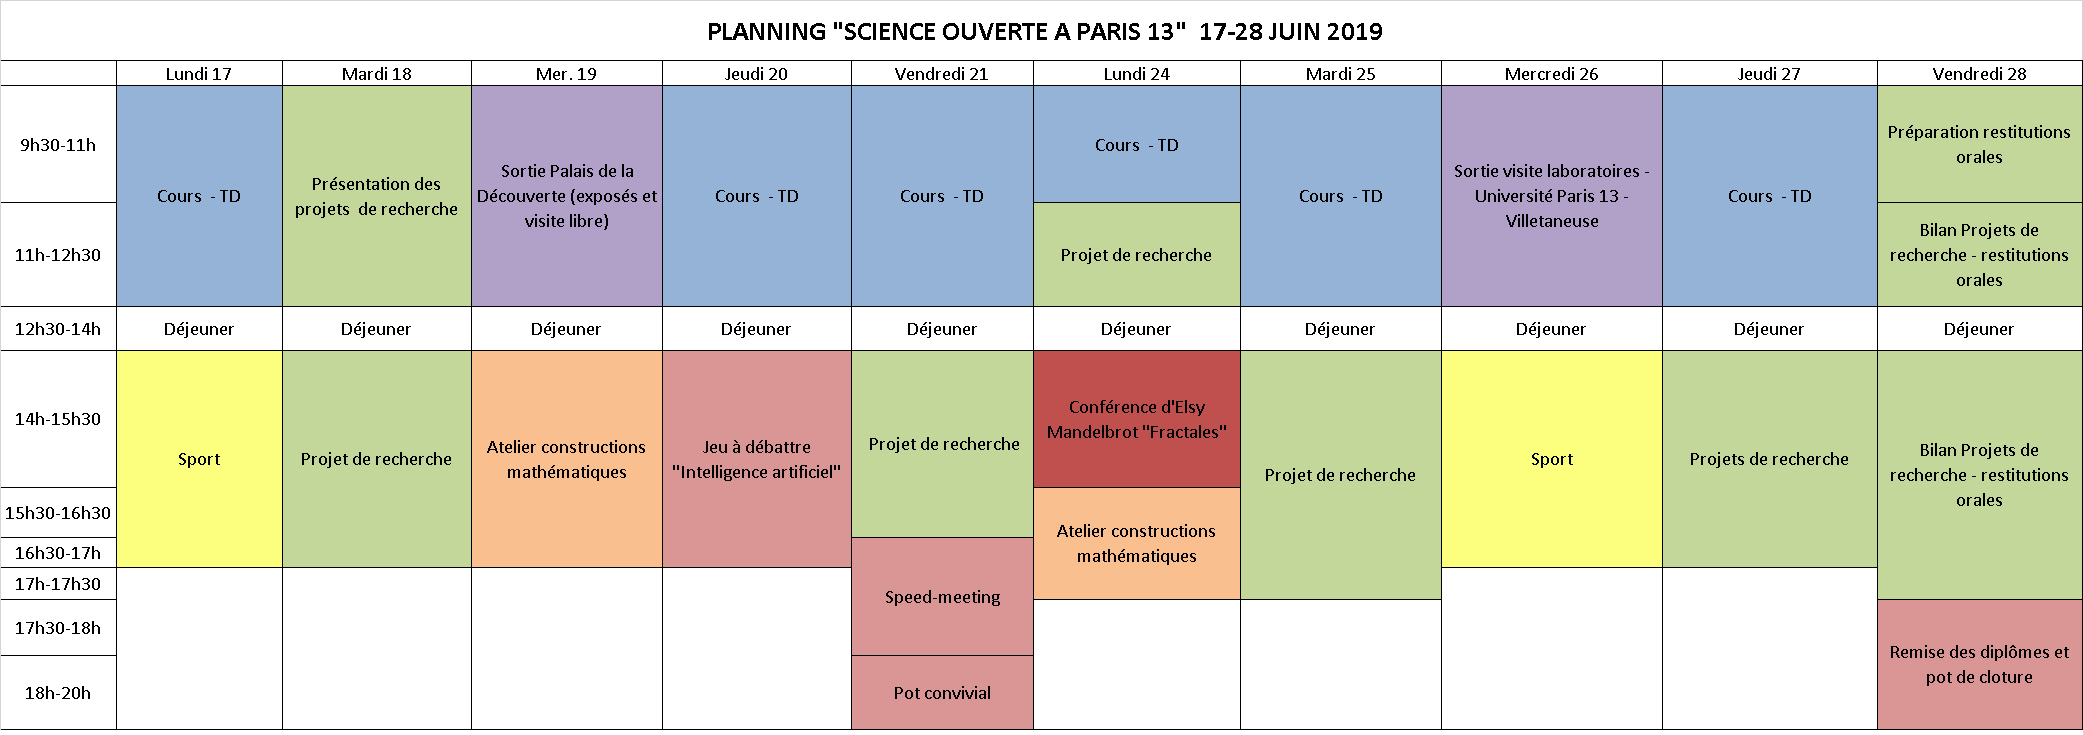 planning_2019.png